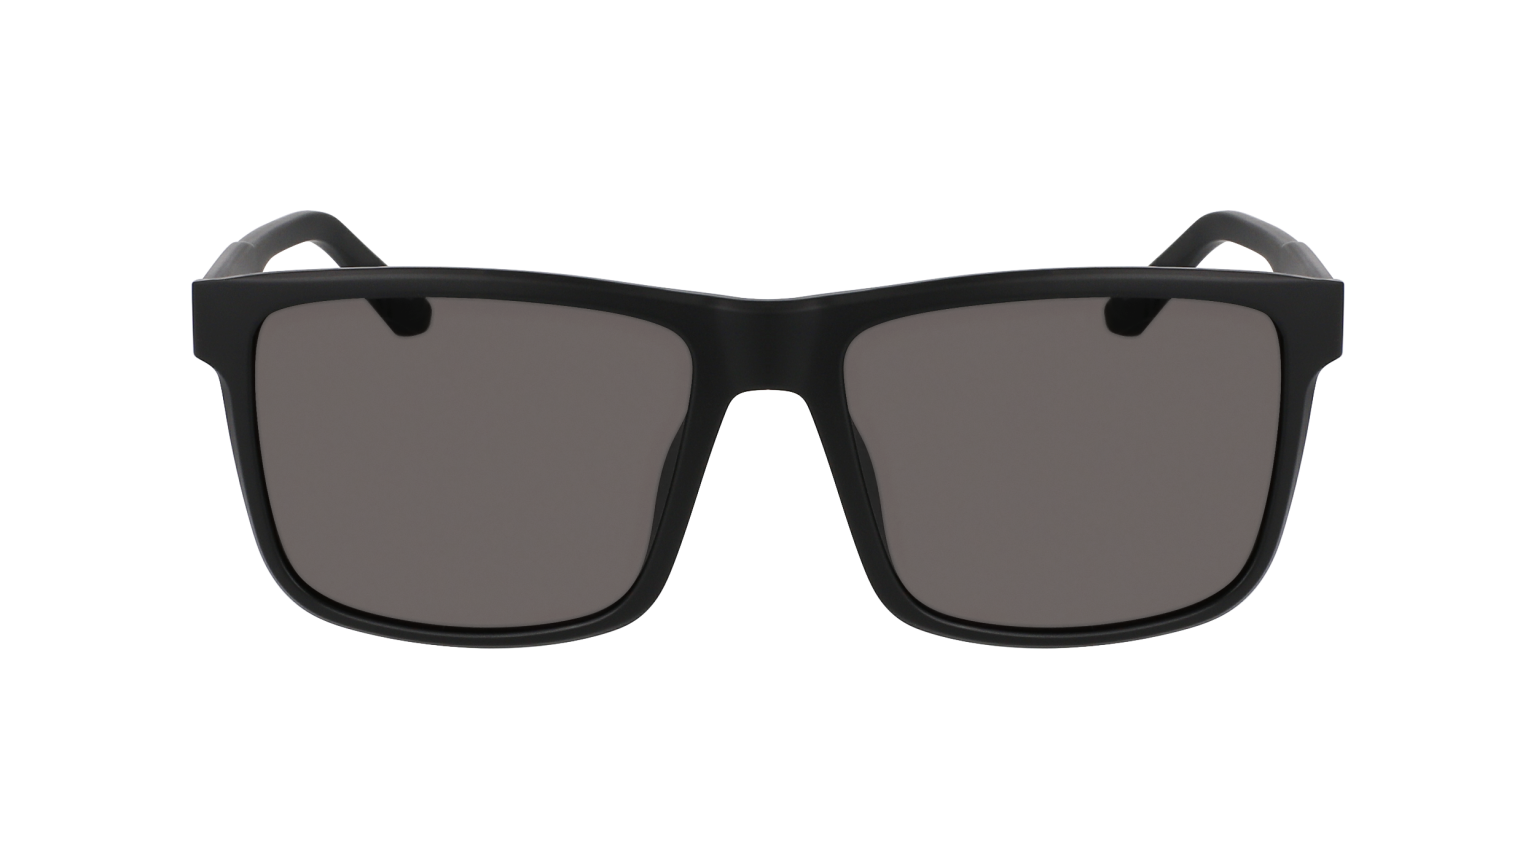 MERIDIEN UPCYCLED - Matte Black with Lumalens Smoke Lens